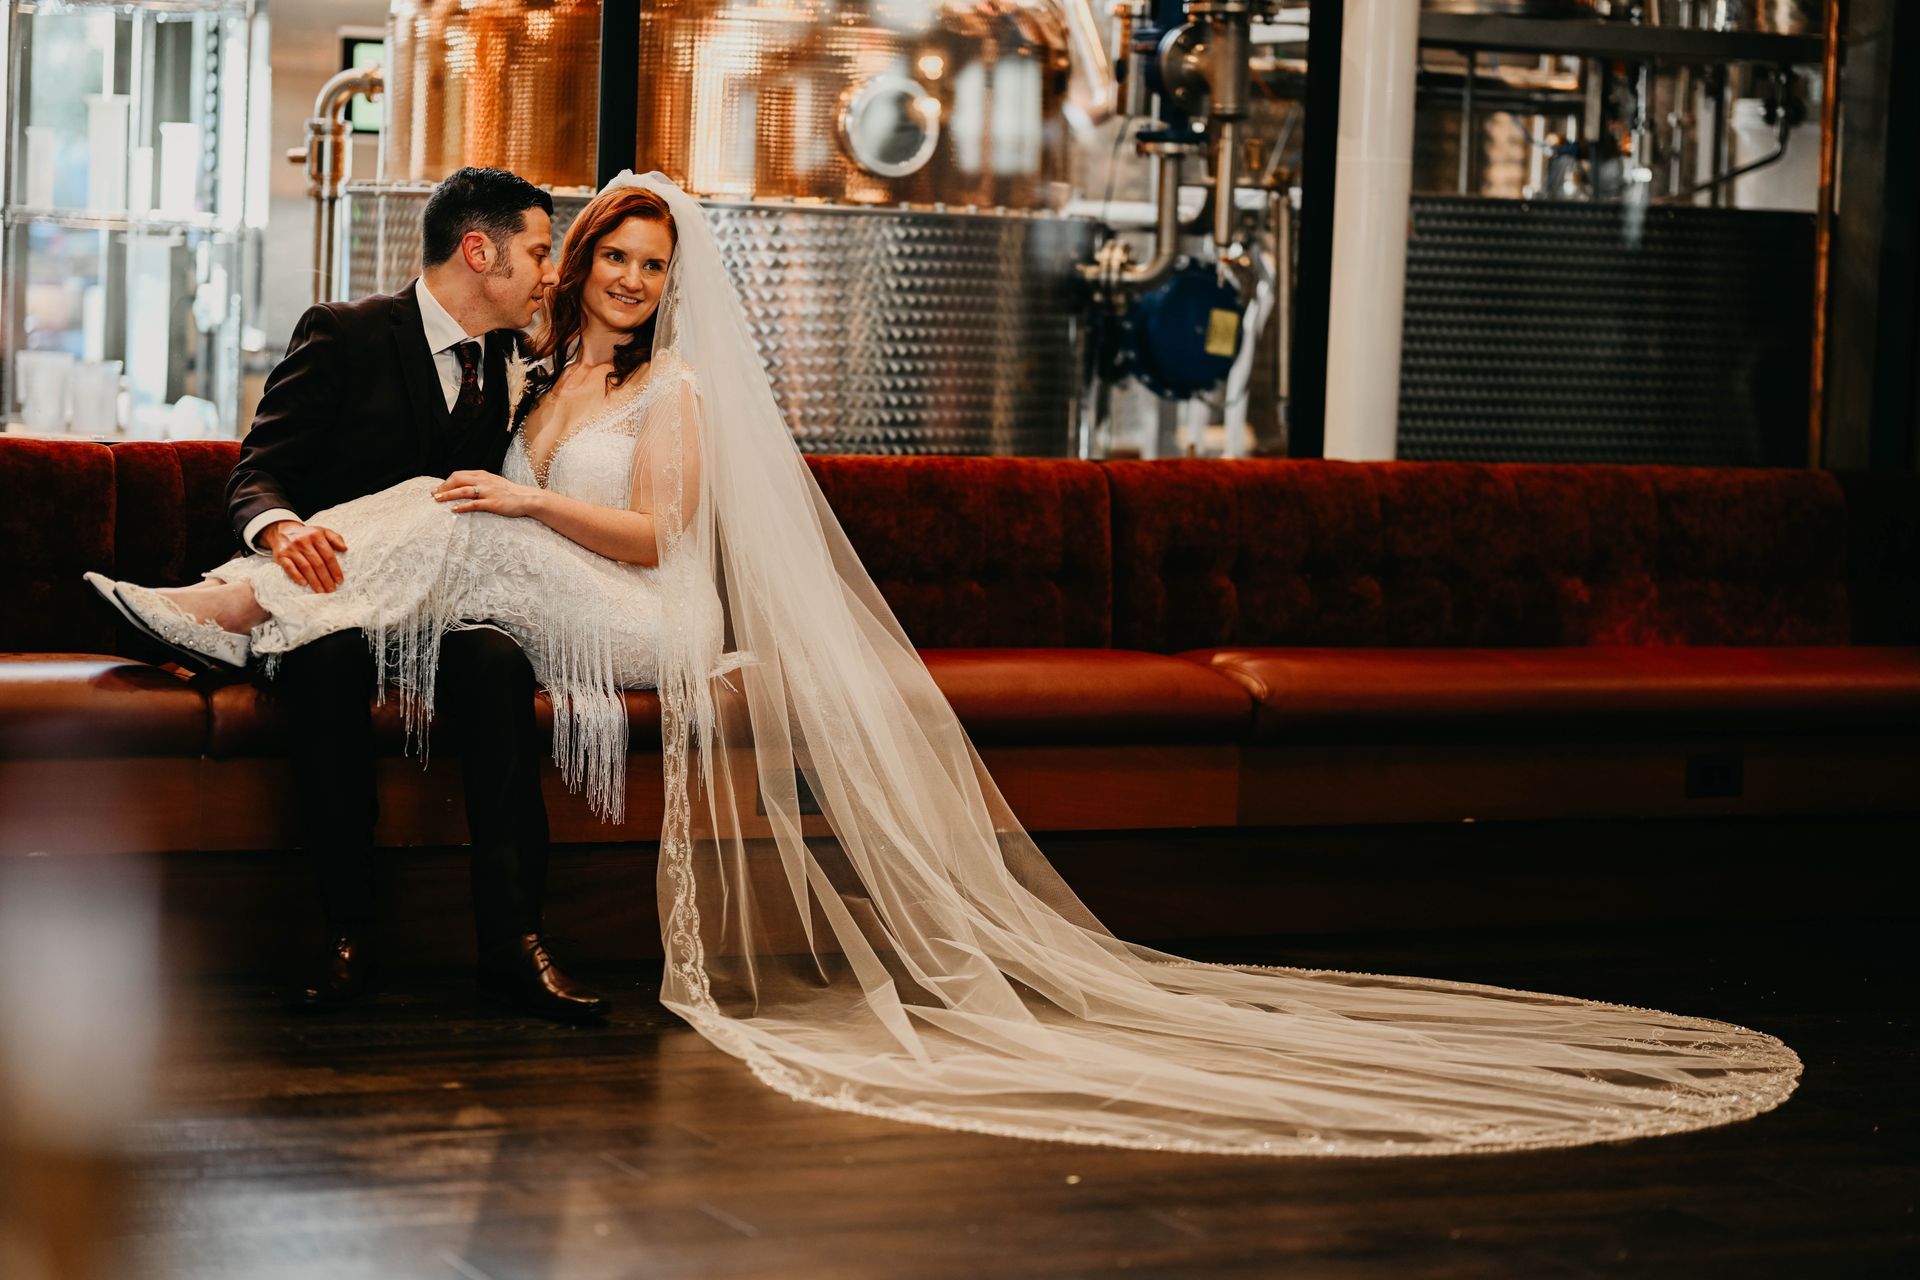 a bride and groom are sitting on a couch and the bride is wearing a long veil